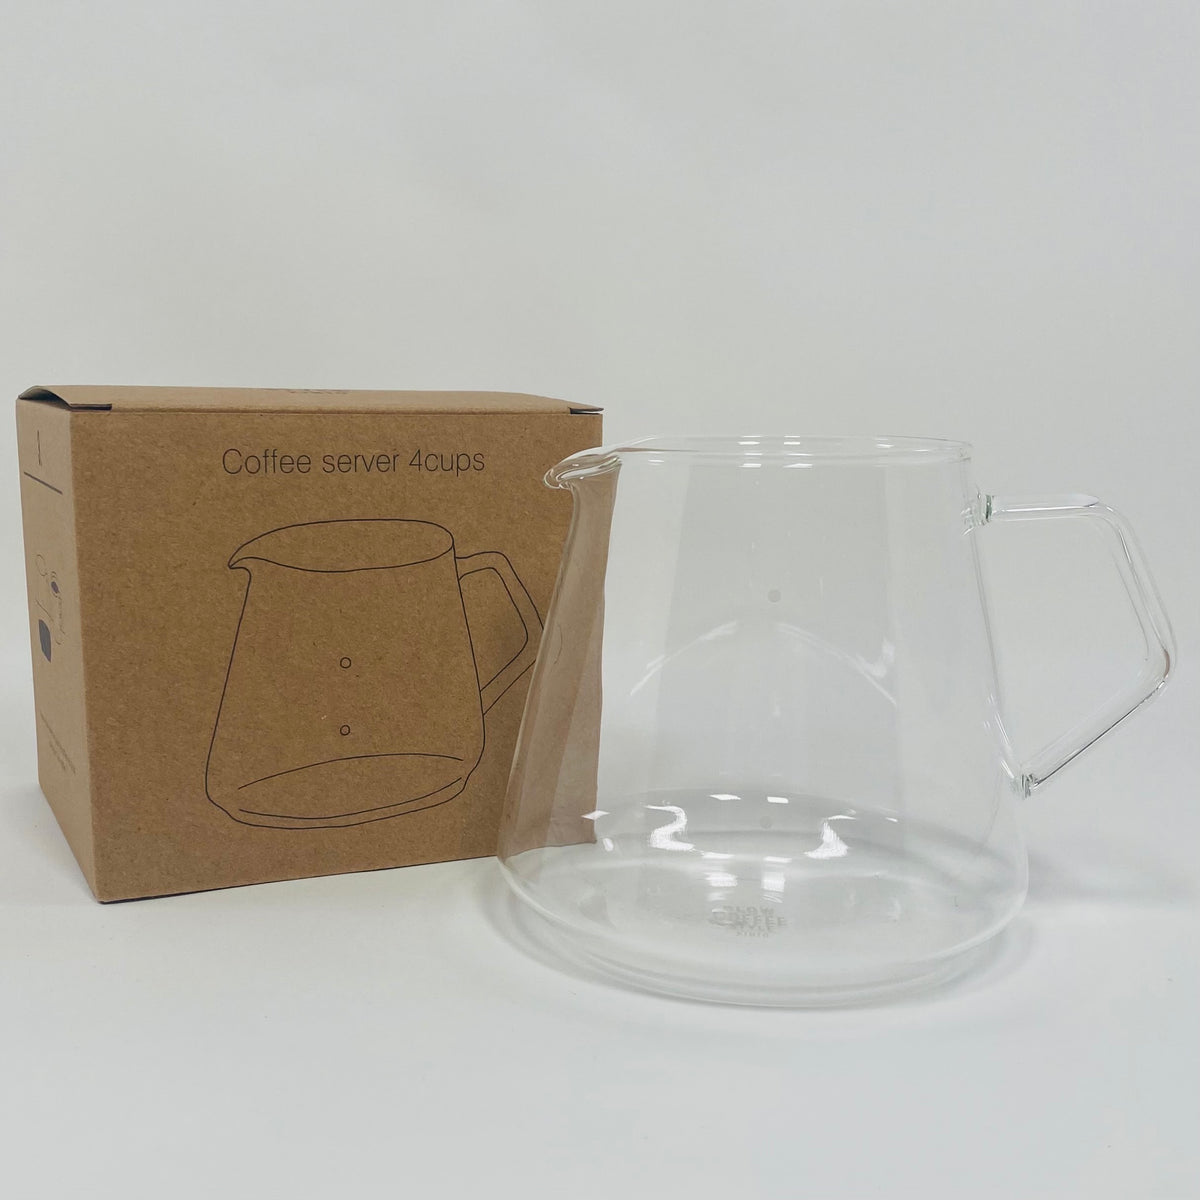 Kinto SCS-S02 Coffee Server 600ml - 4 cup